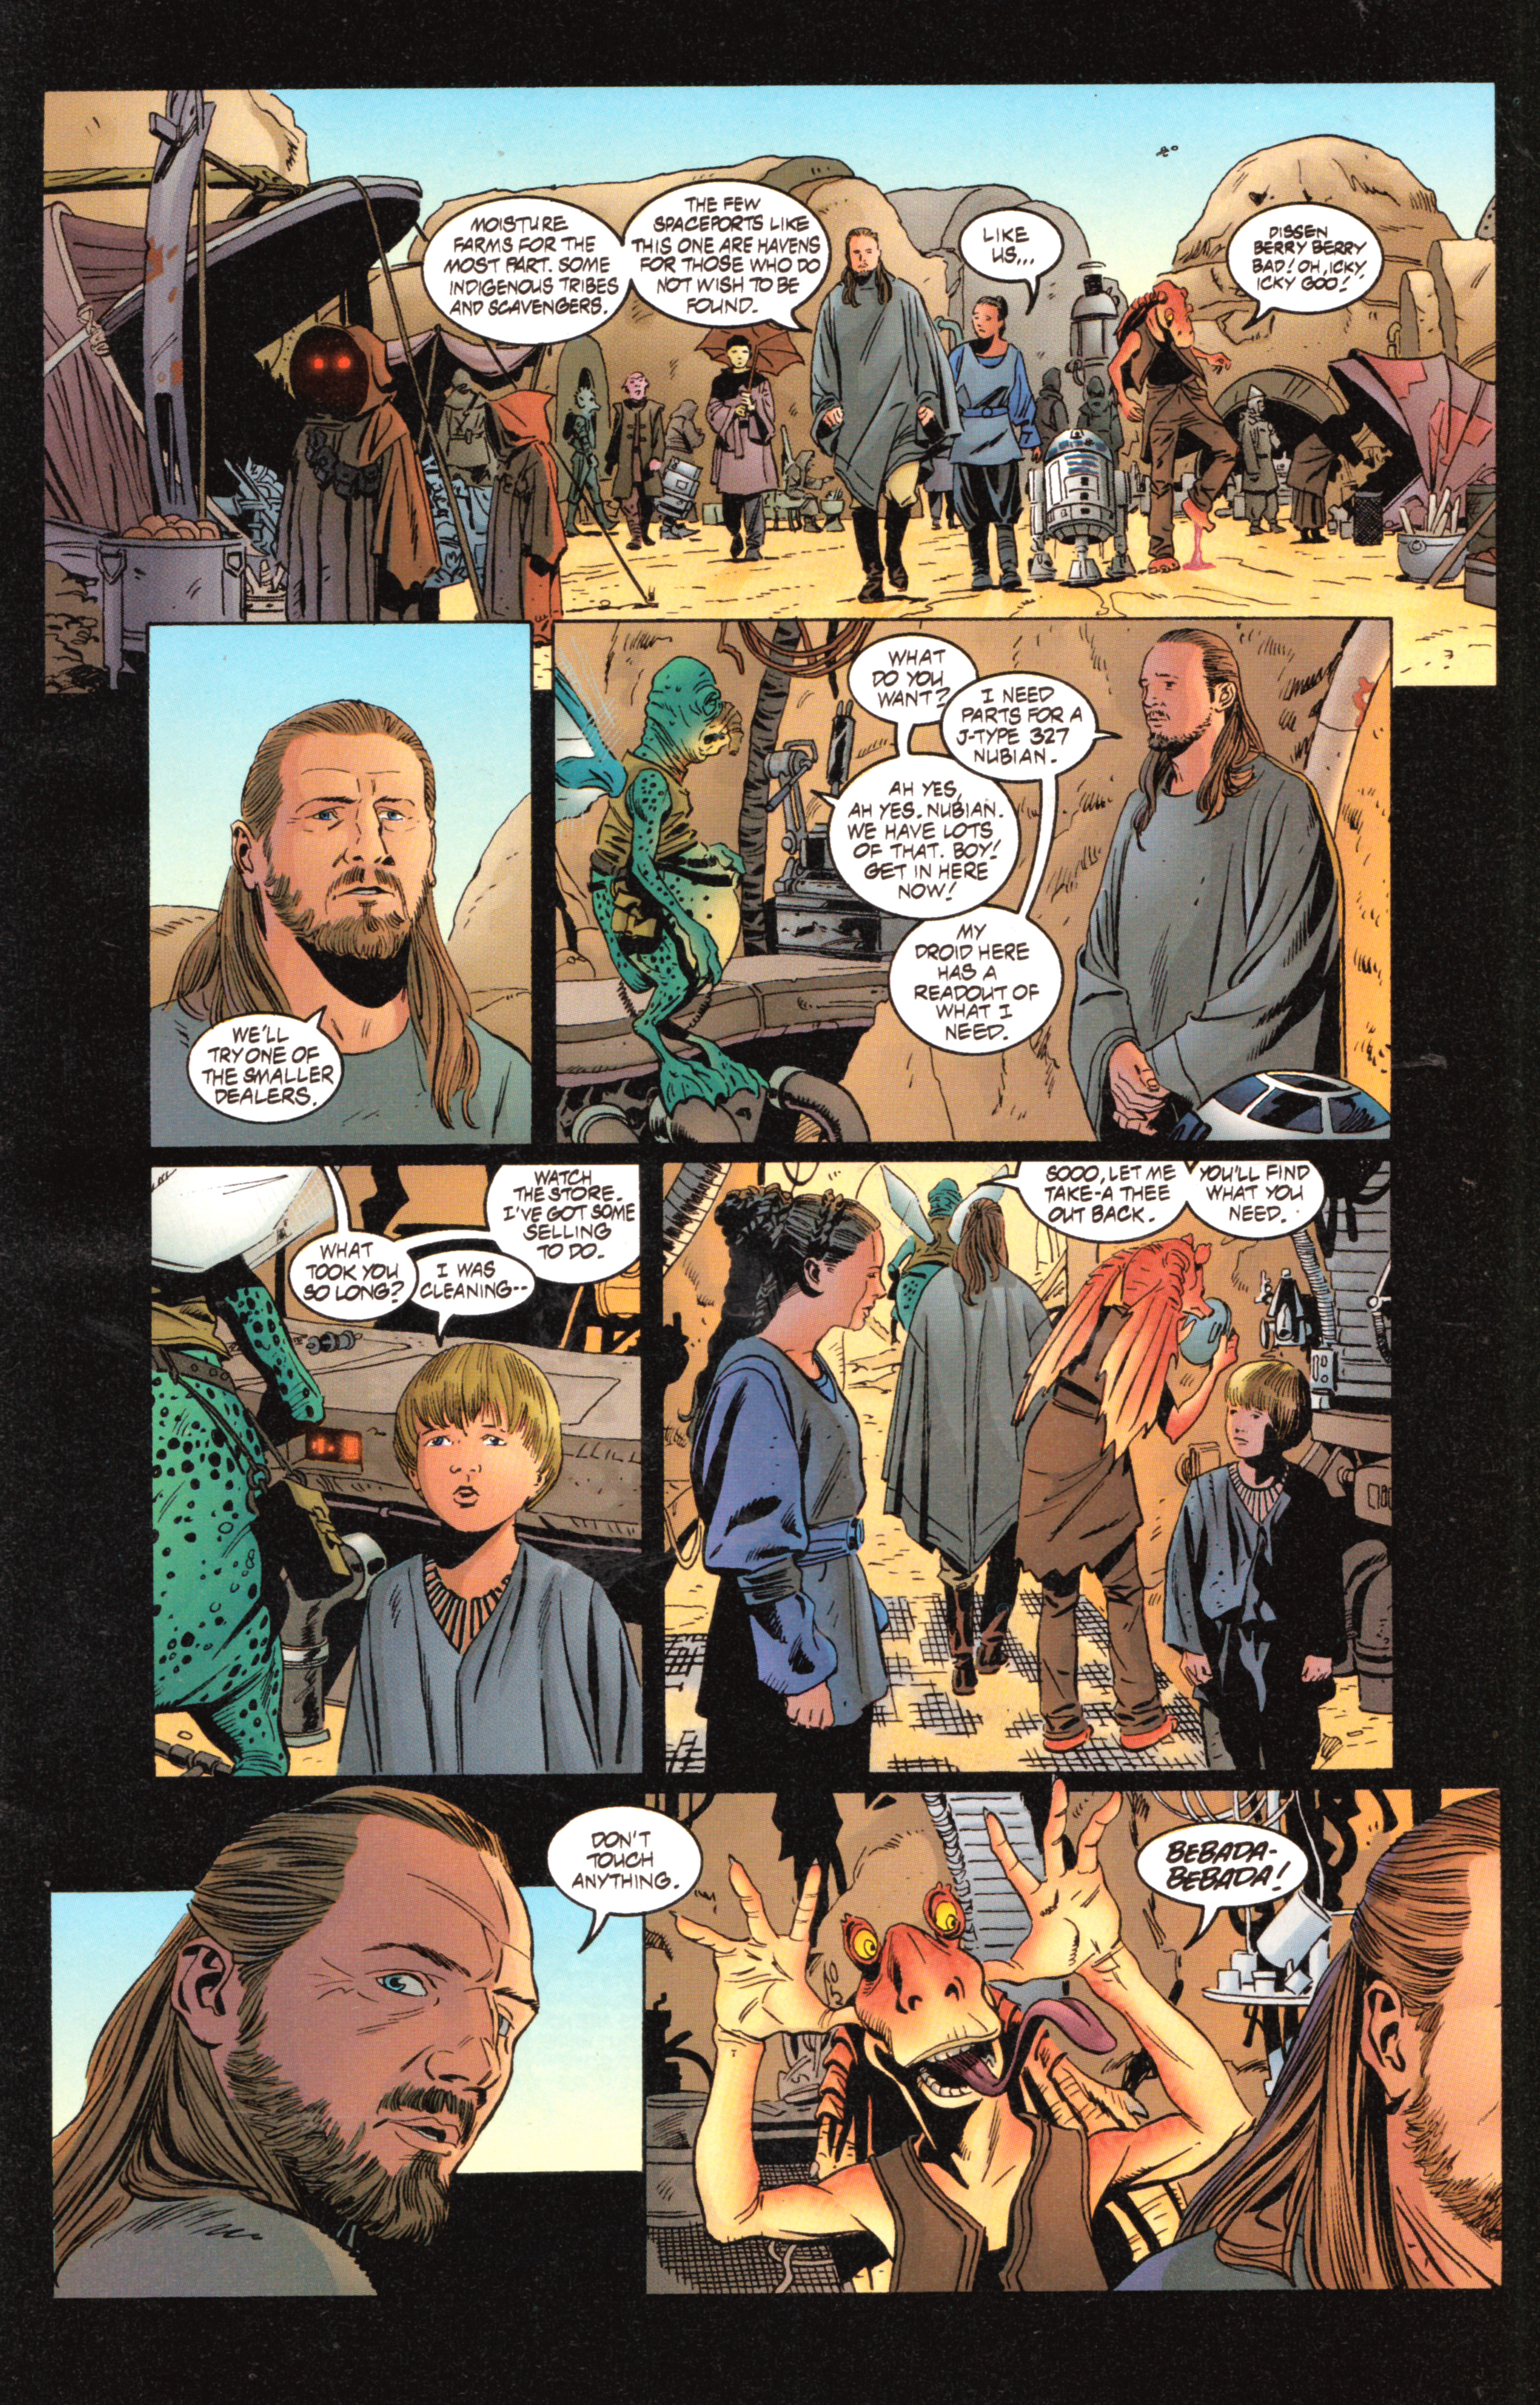 Star Wars Episode I The Phantom Menace Issue 2 | Read Star Wars Episode I The  Phantom Menace Issue 2 comic online in high quality. Read Full Comic online  for free -